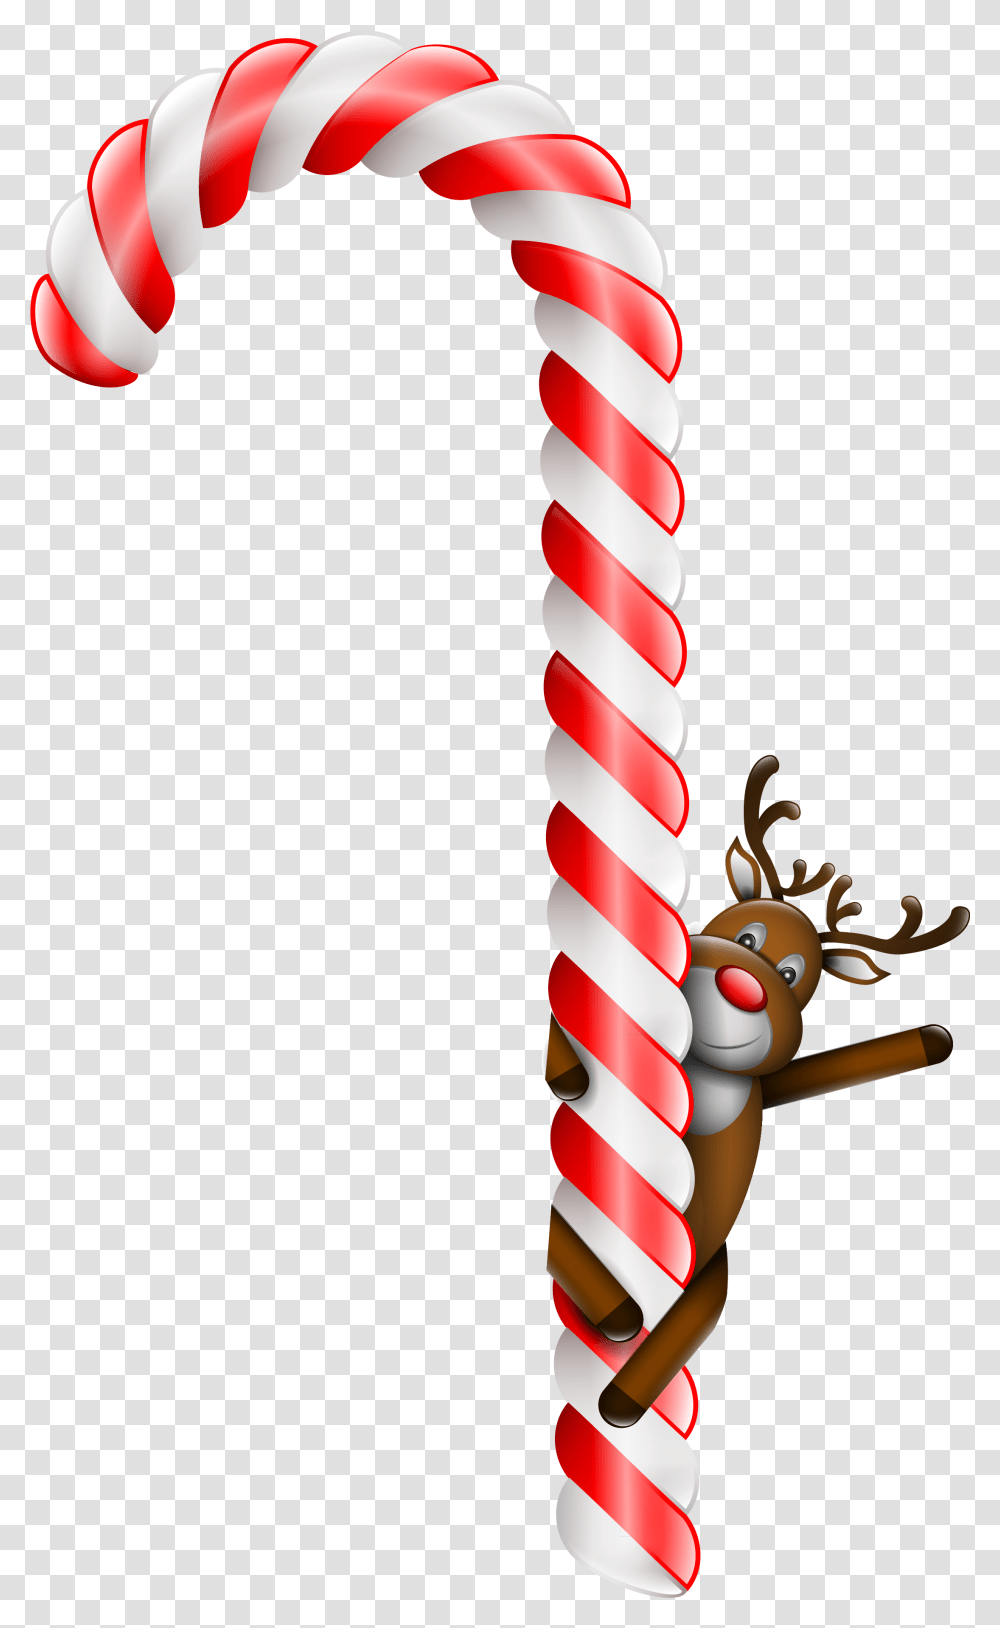 Candy Cane Stick Candy Lollipop Christmas Clip Art Candy Canes Background, Candle Transparent Png